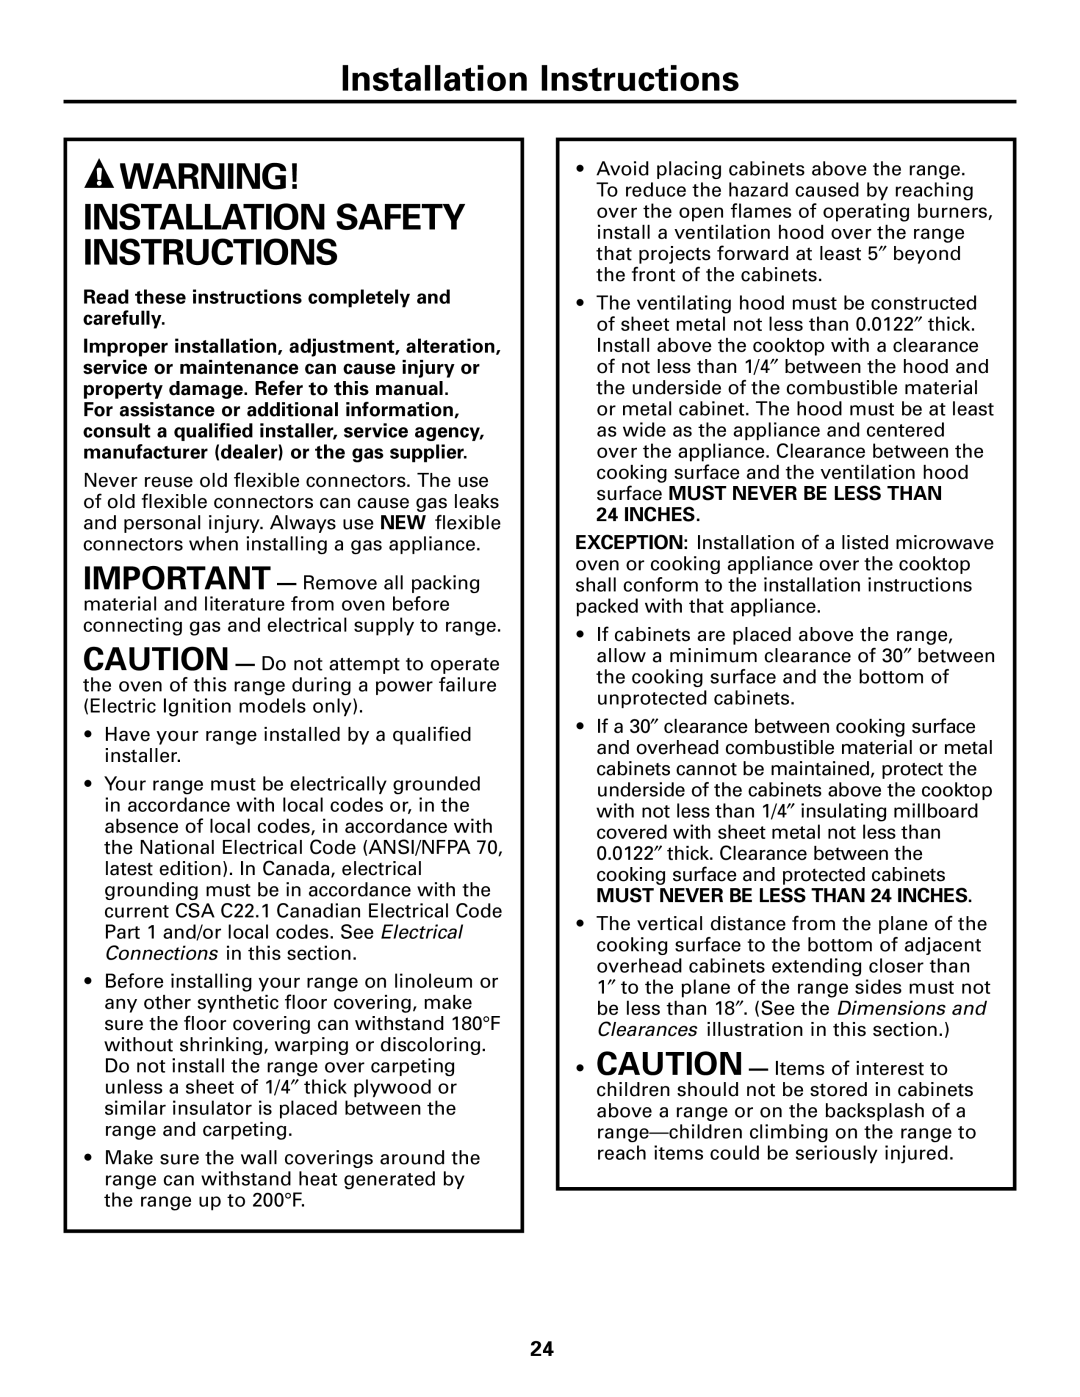 Hotpoint RGA724 Installation Instructions, Installation Safety Instructions, Inches, MUST NEVER BE LESS THAN 24 INCHES 